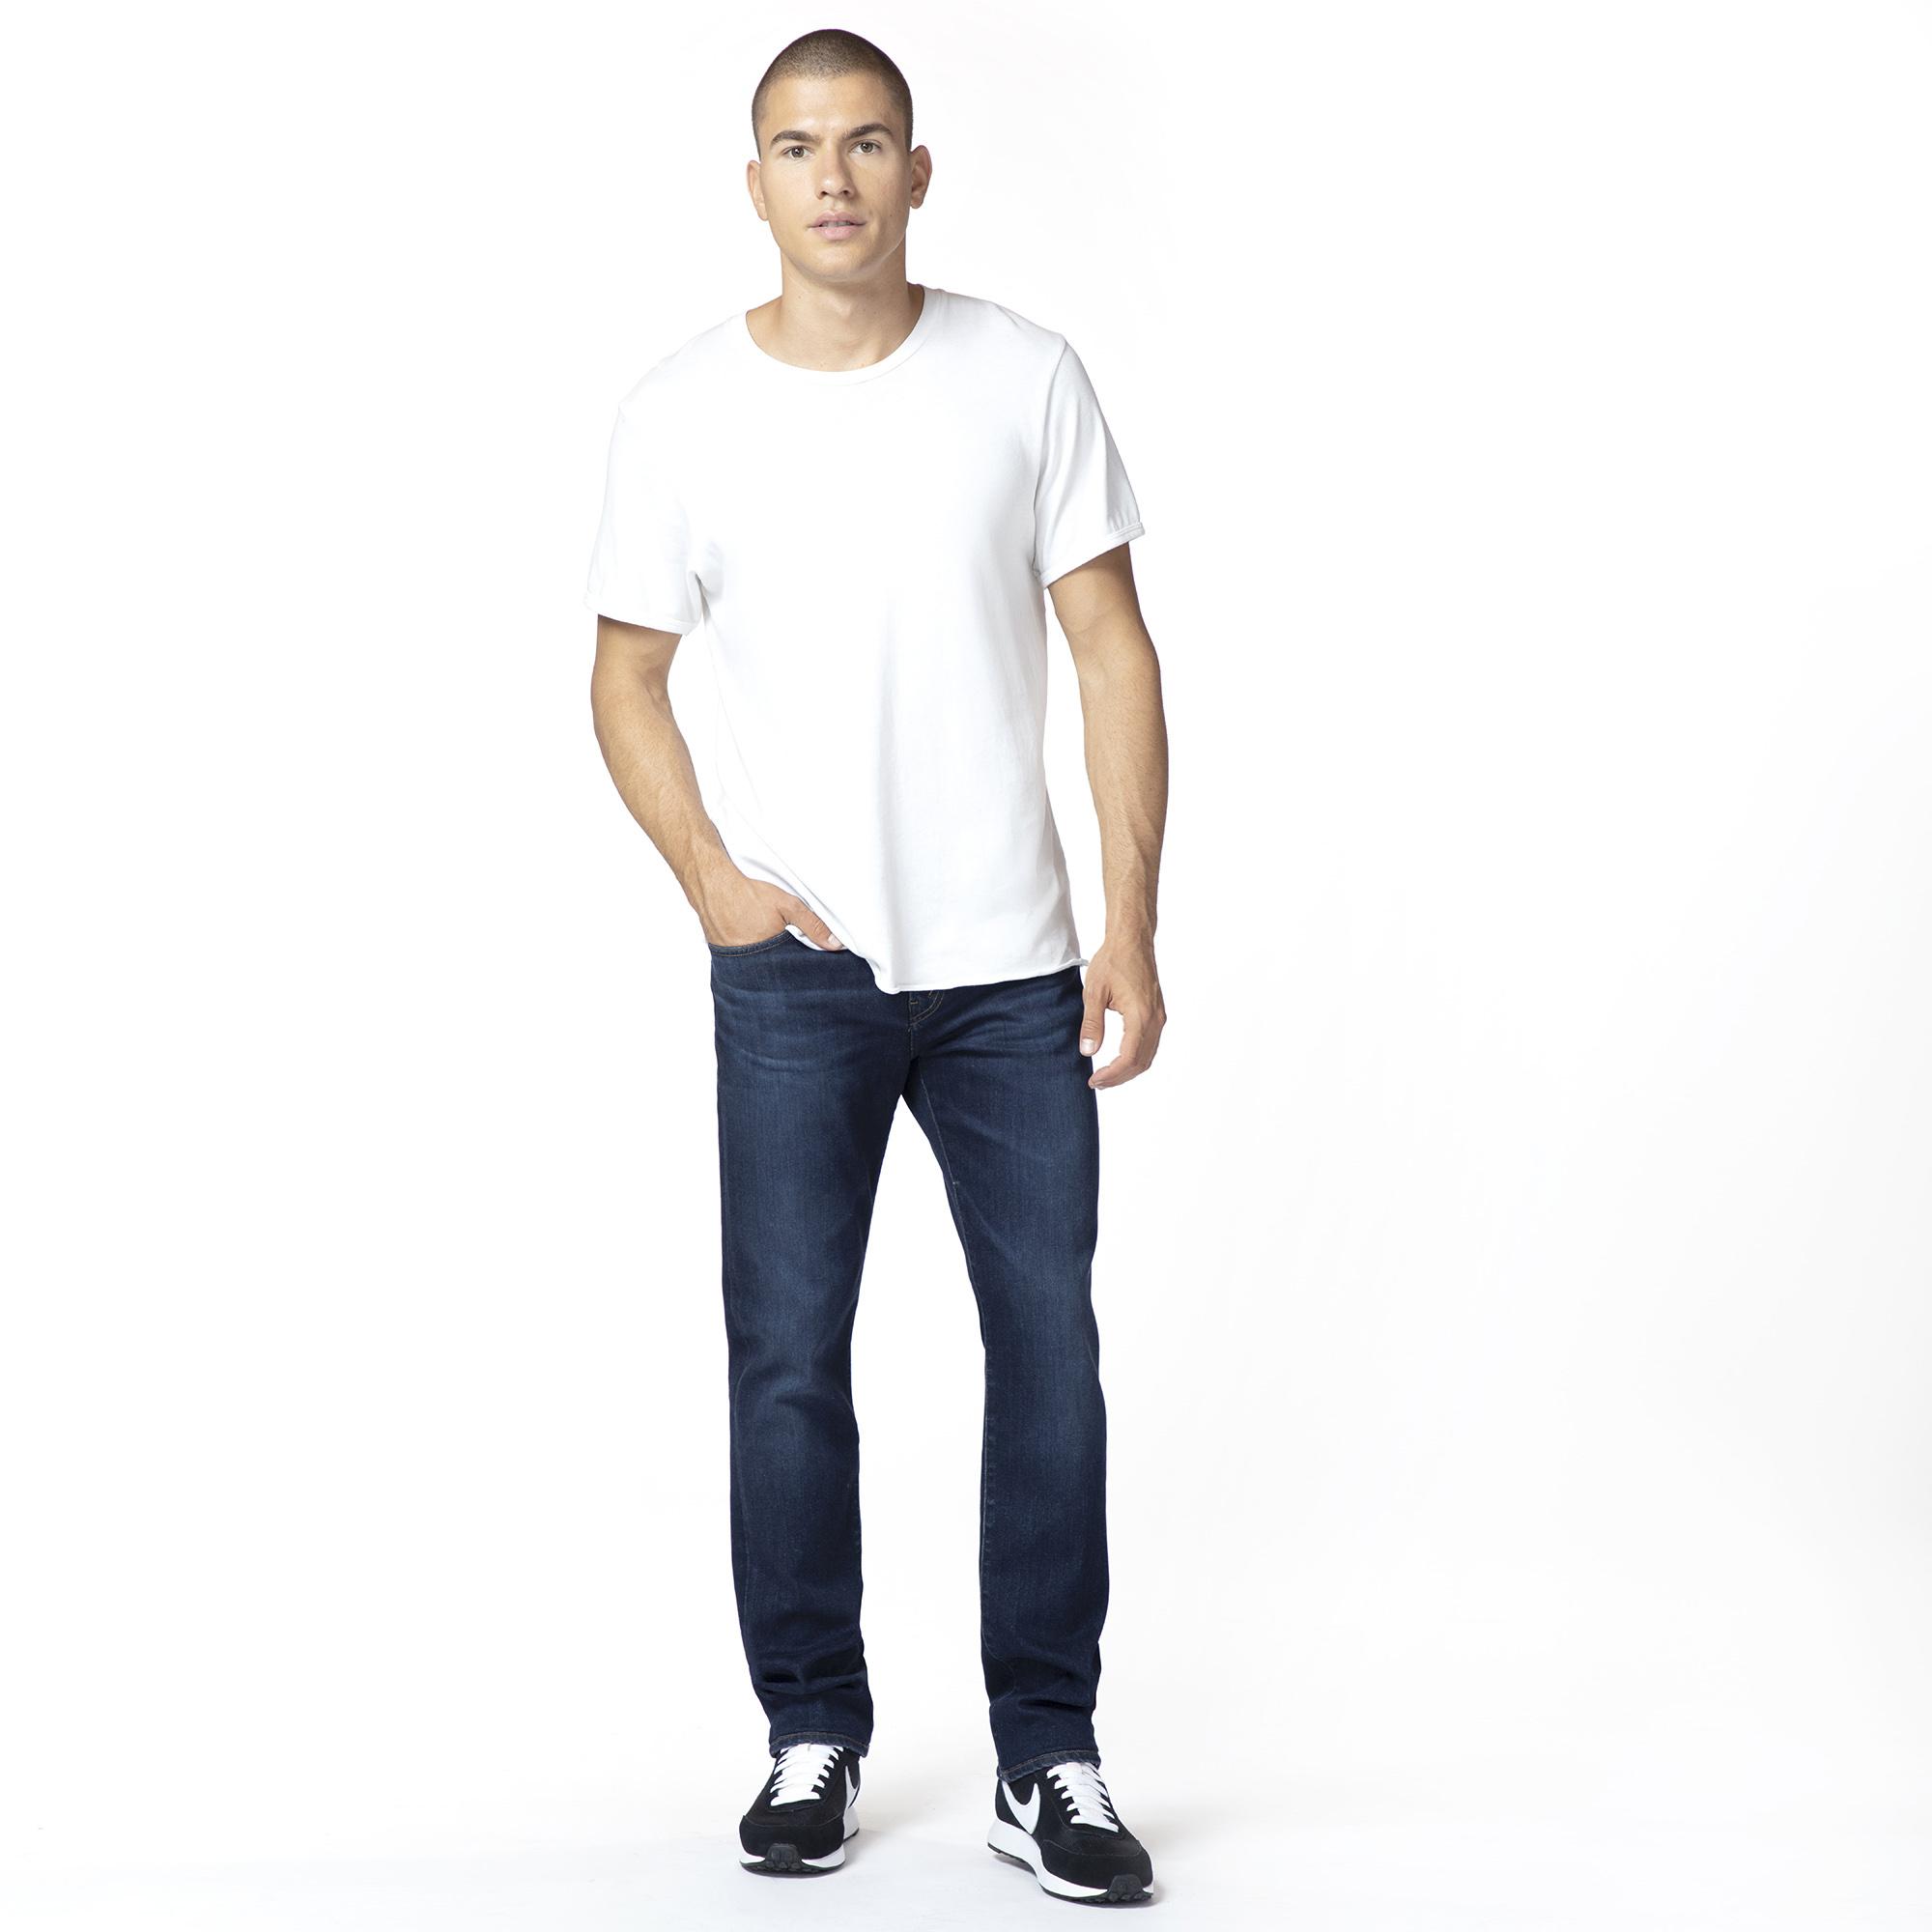 j brand sustainable jeans